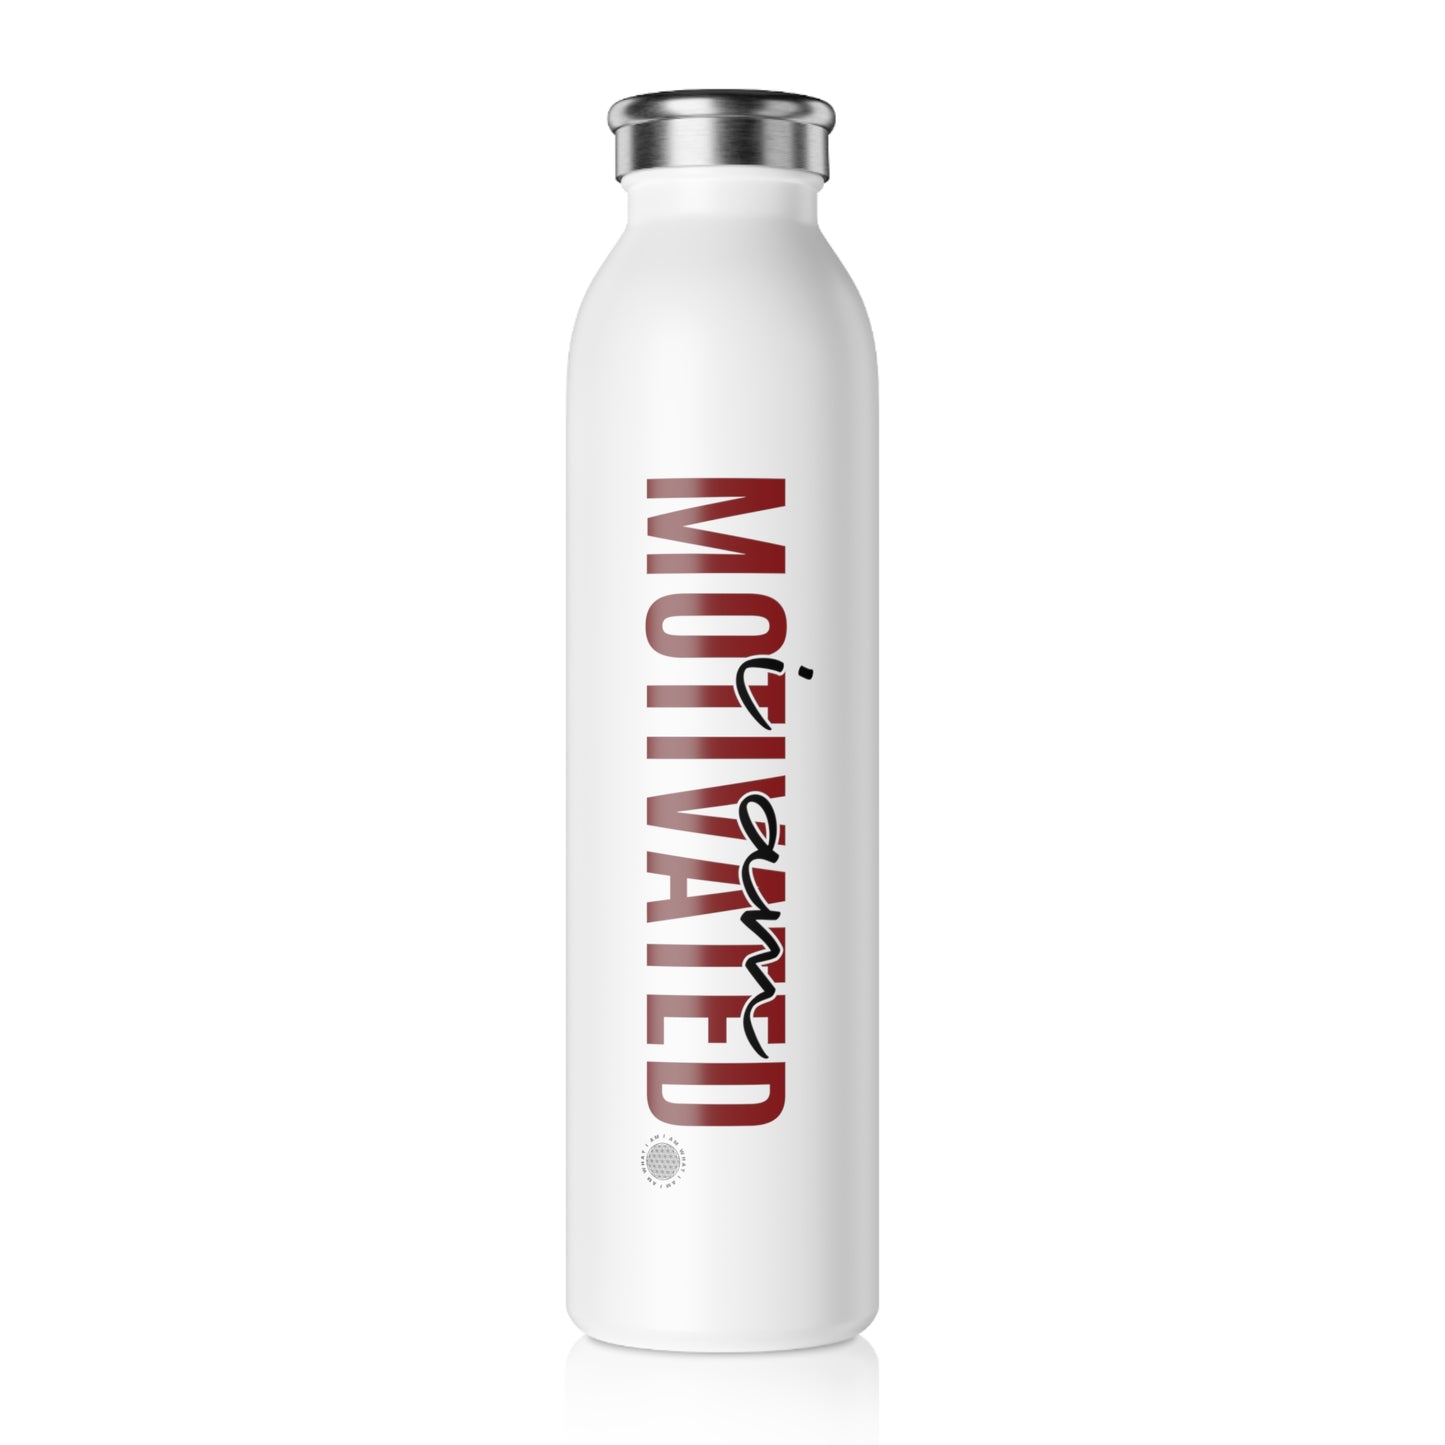 Our I Am Motivated affirmation water bottle is one of our positive affirmations for mental health. Positive thinking keeps our mindset happy and healthy. This personalized water bottle was designed to become a creator’s favorite canvas of expression.